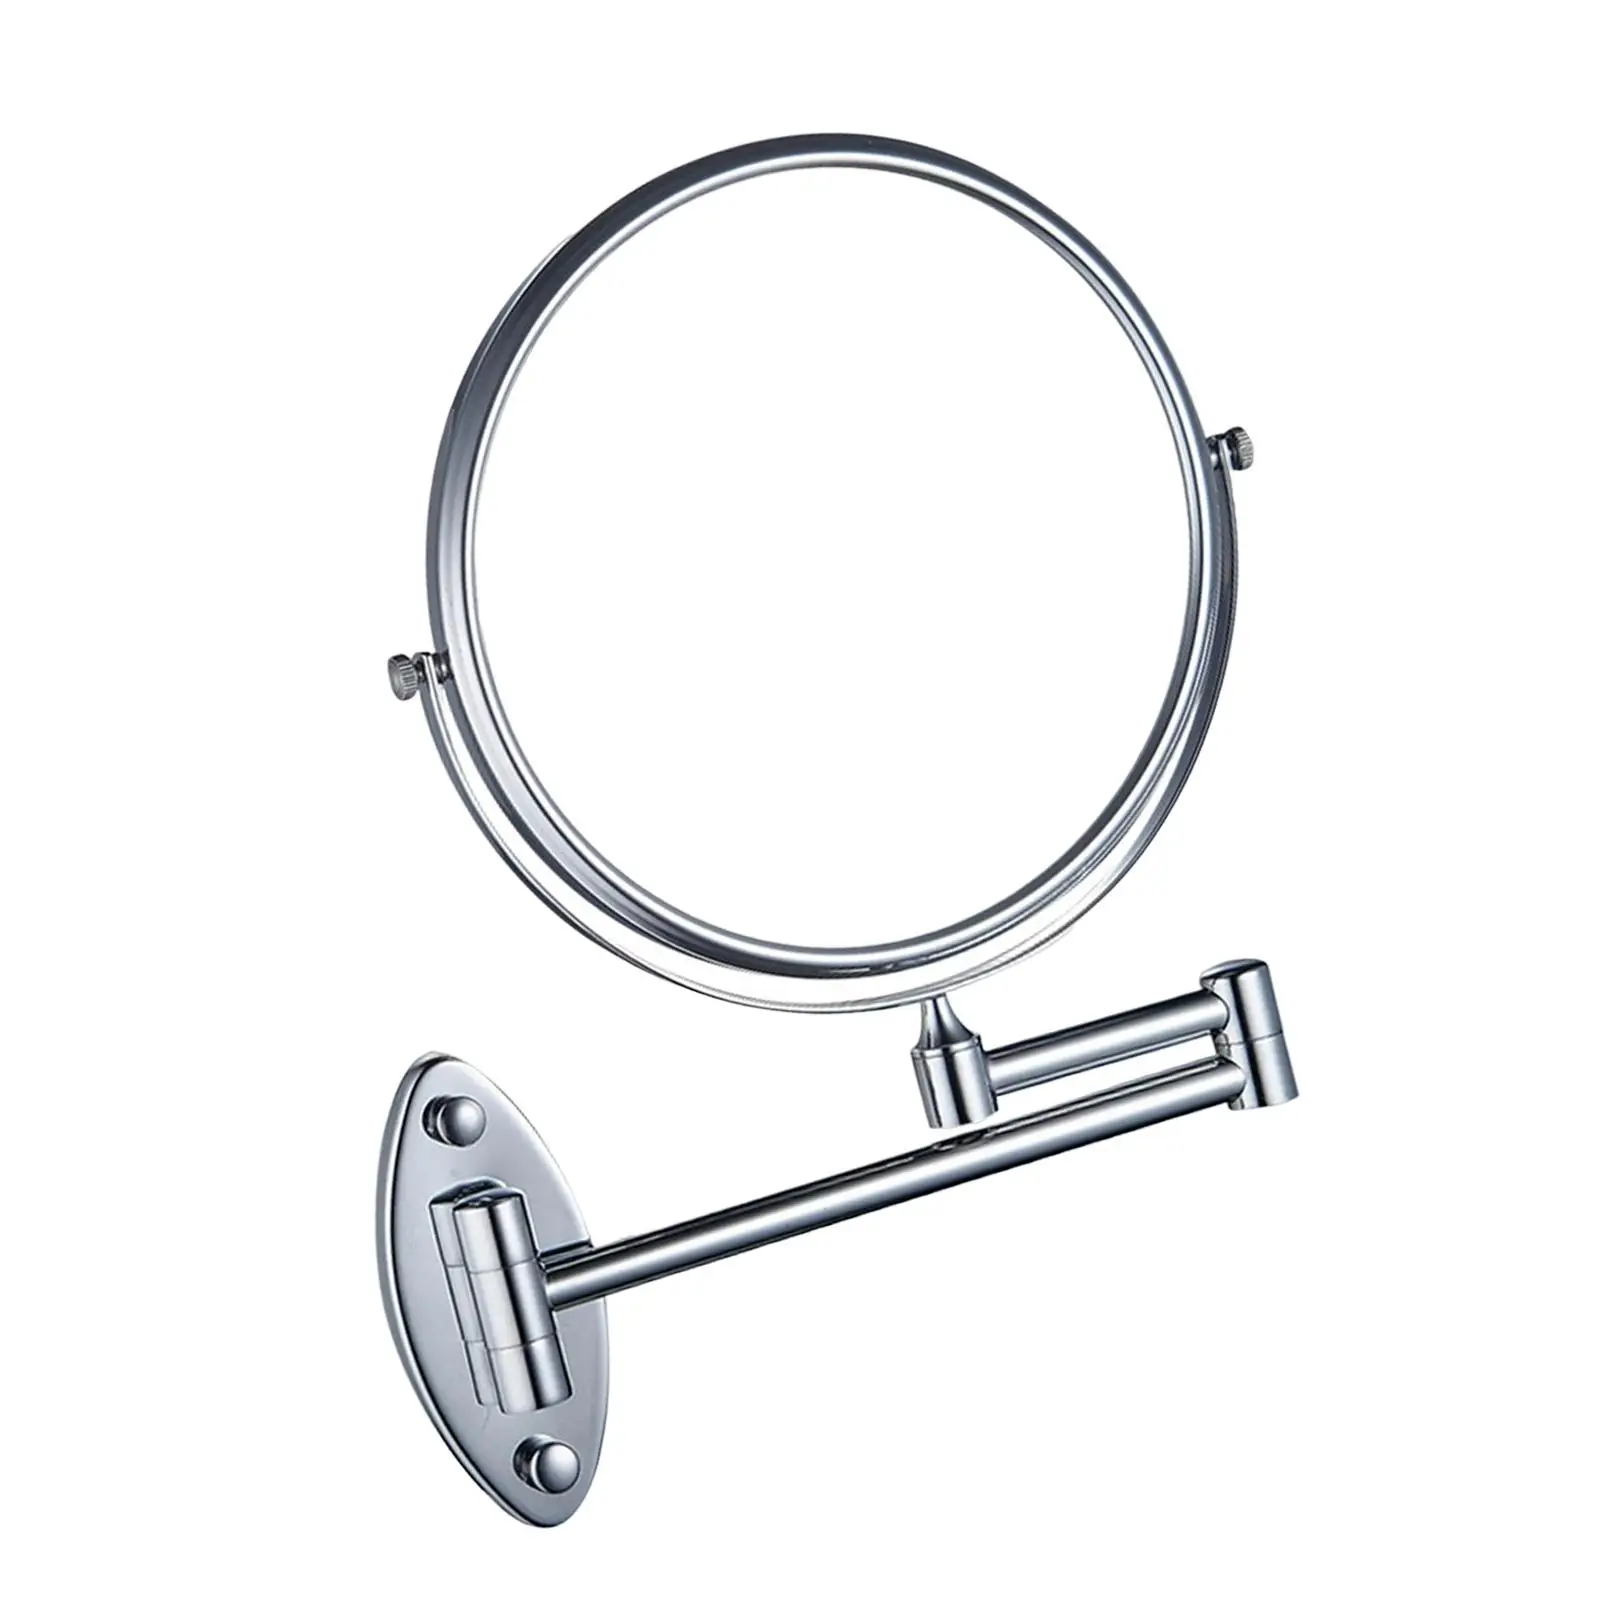 8 inch Wall Mounted Makeup Mirror Polished Chrome Finished Dual Side Makeup Mirror 360 Swivel Vanity Mirror for Bathroom Hotel